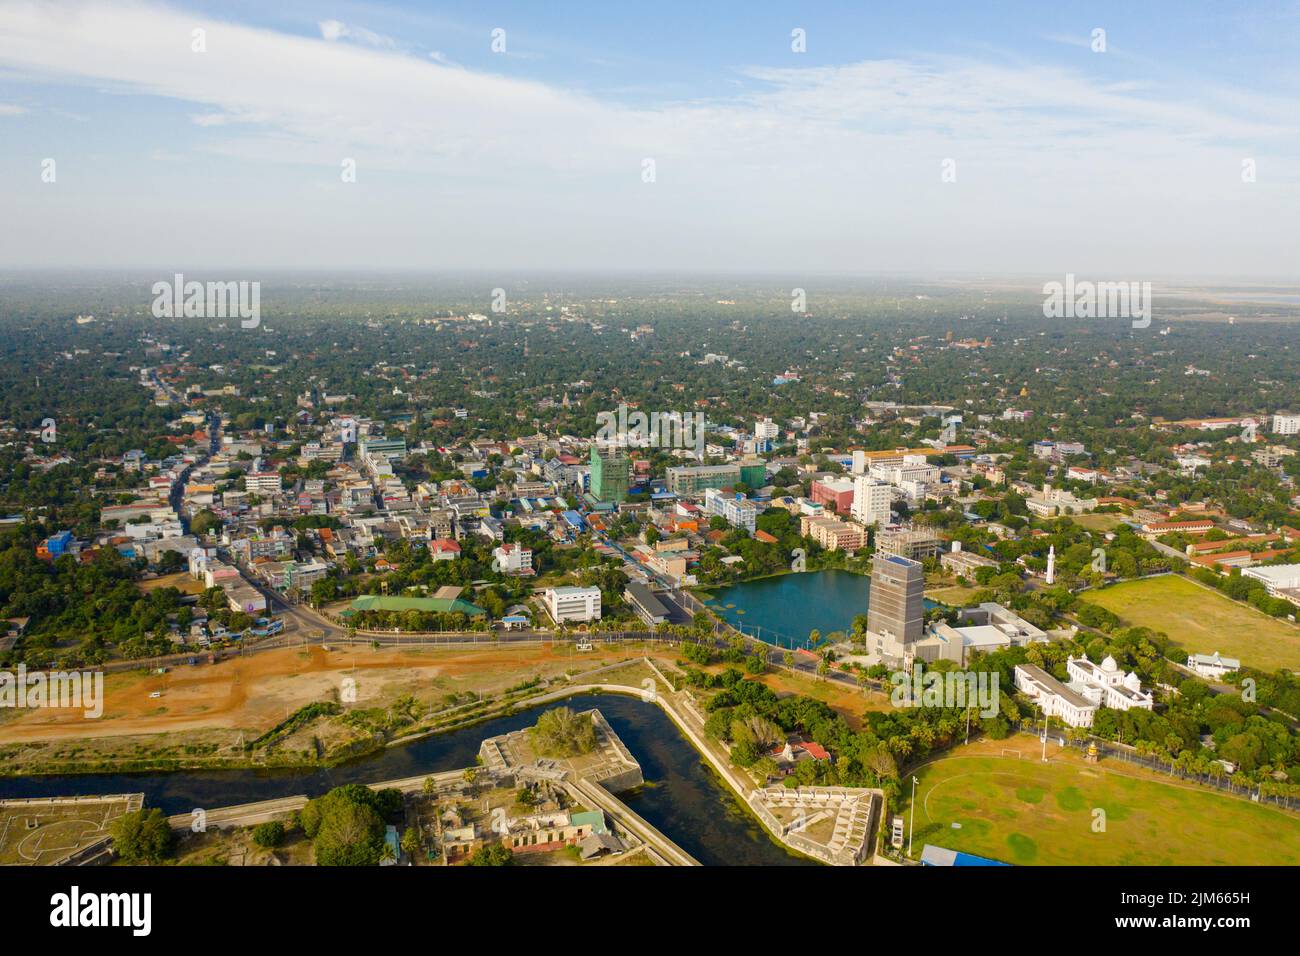 Aerial View Of Jaffna District The Northernmost Region Of Sri Lanka